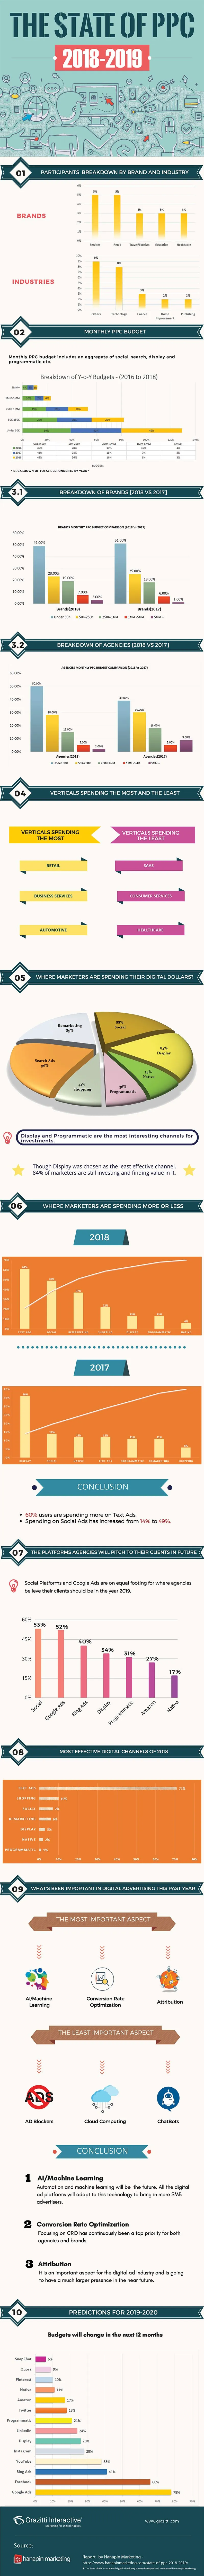 The State of Pay Per Click 2018-2019 [Infographic]